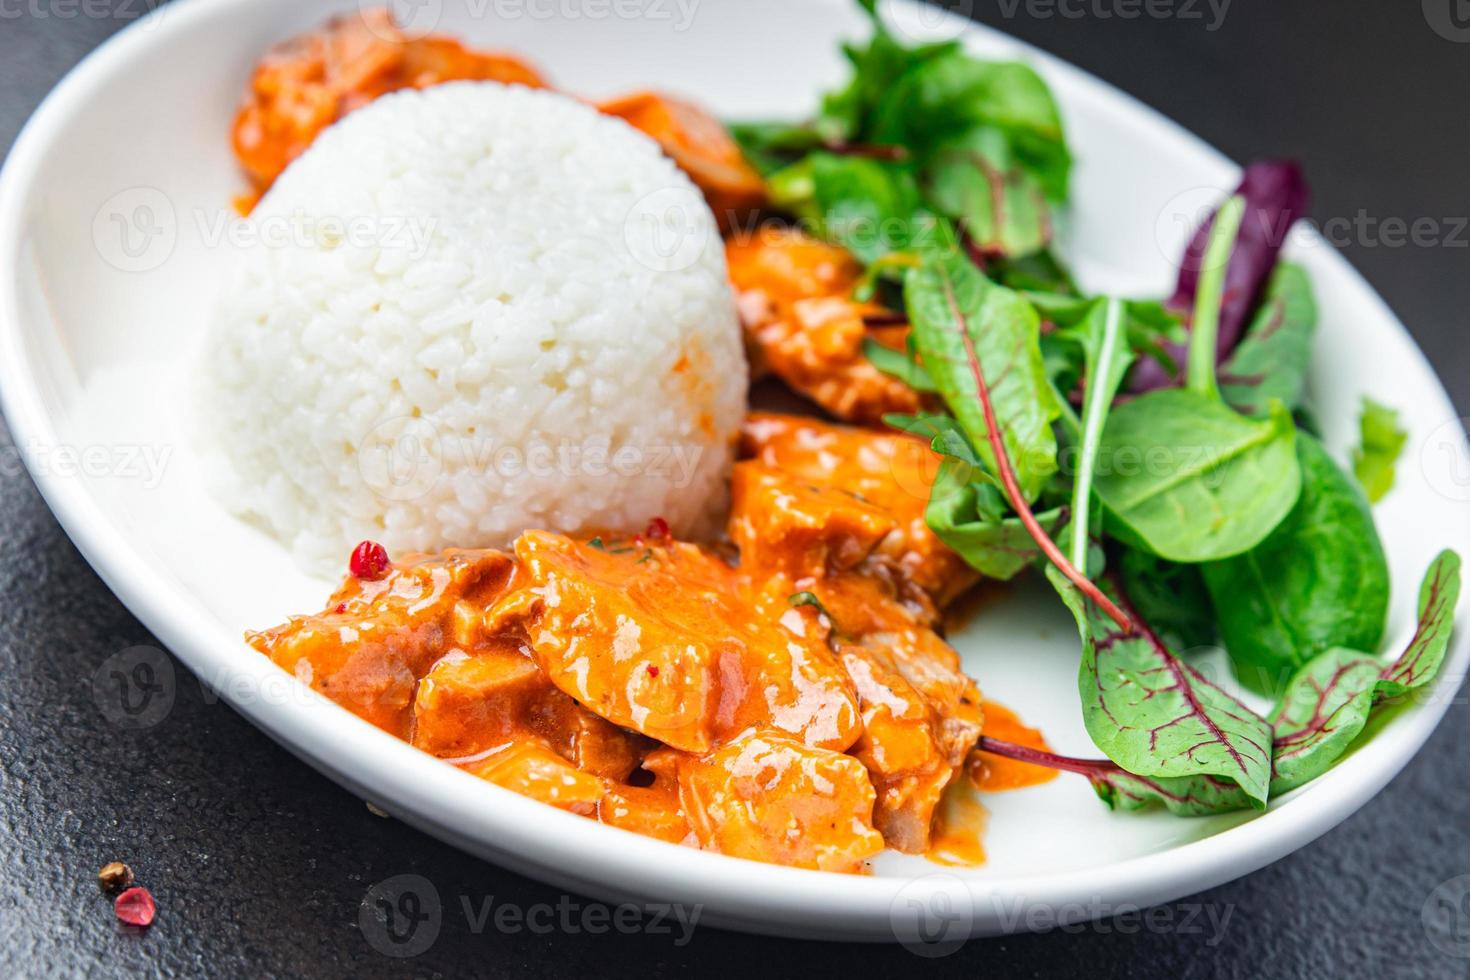 rice meat curry and leaves lettuce mix fresh portion dietary healthy meal food diet still life snack photo